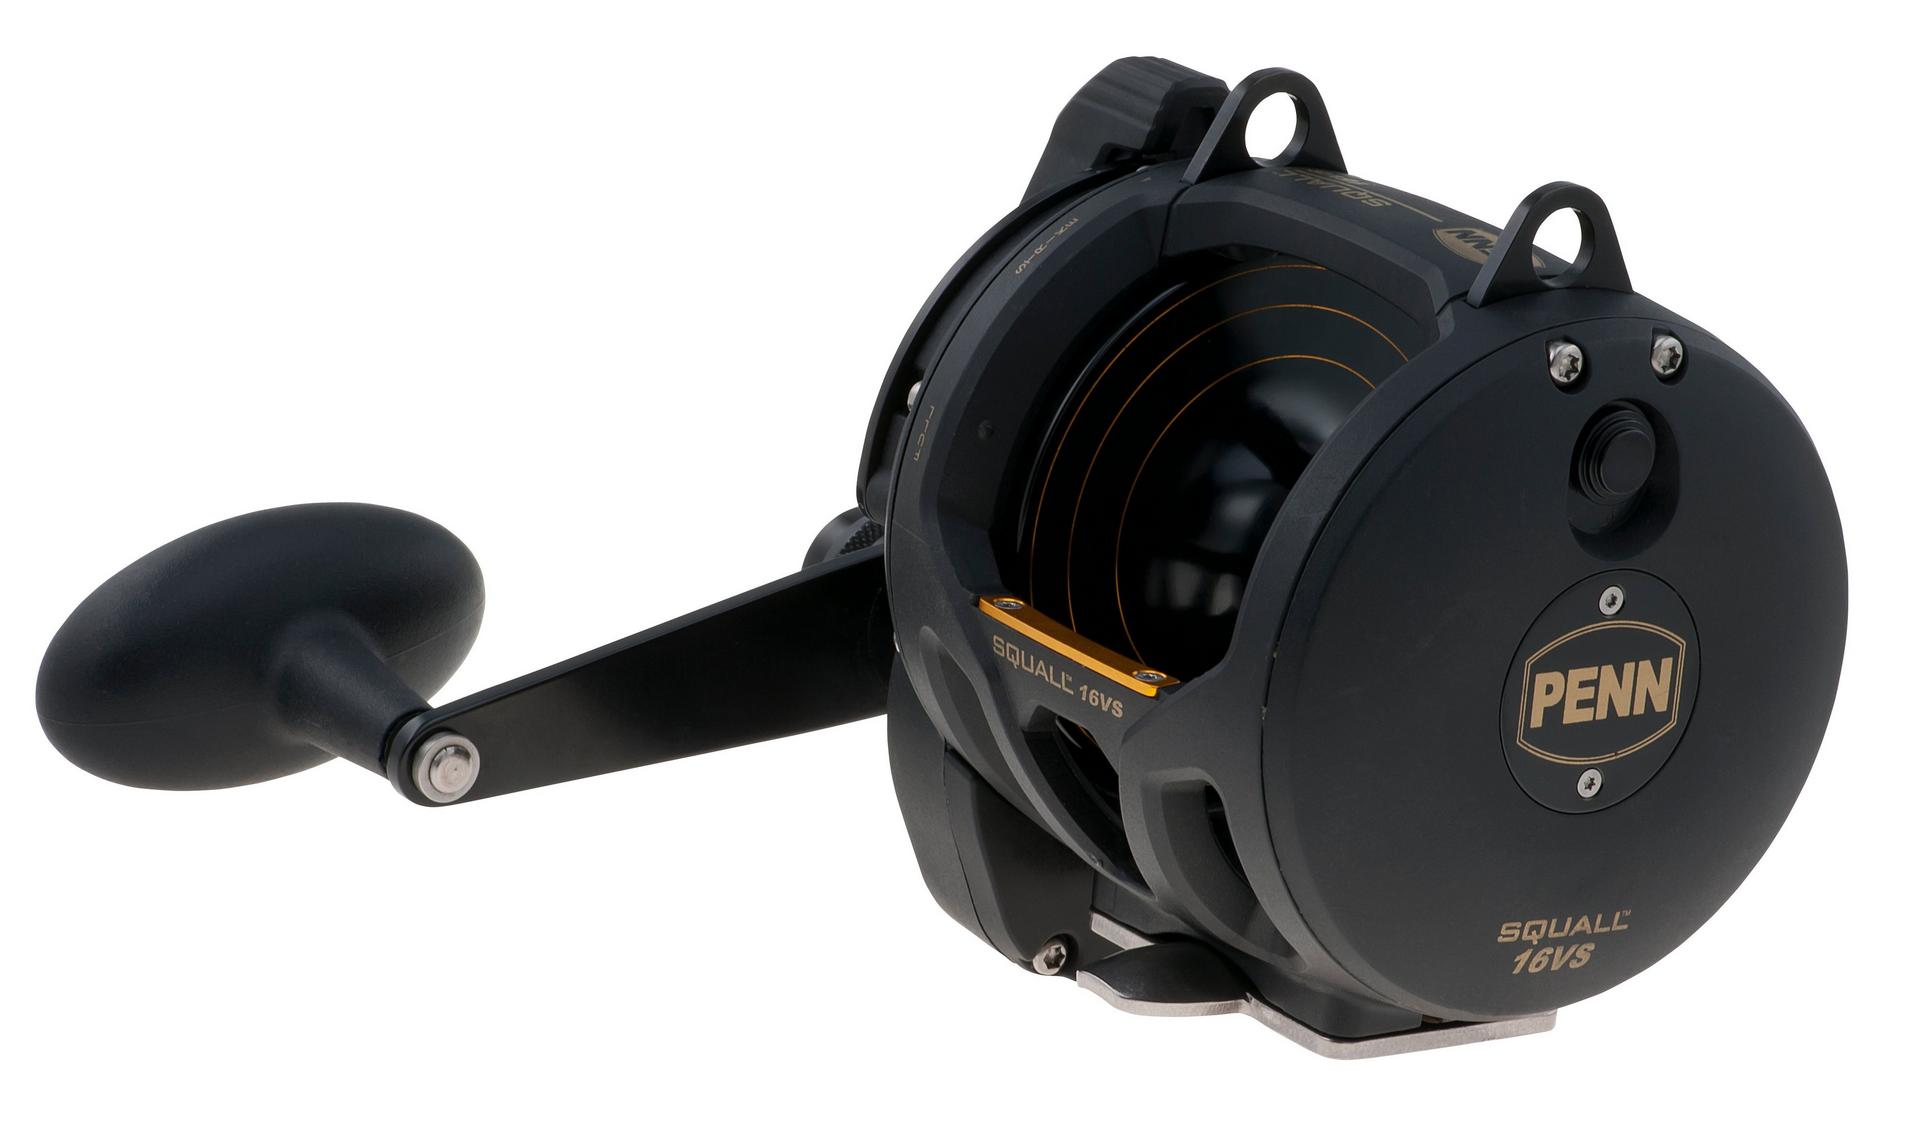 Penn Squall 30LW saltwater fishing reel how to take apart and service 